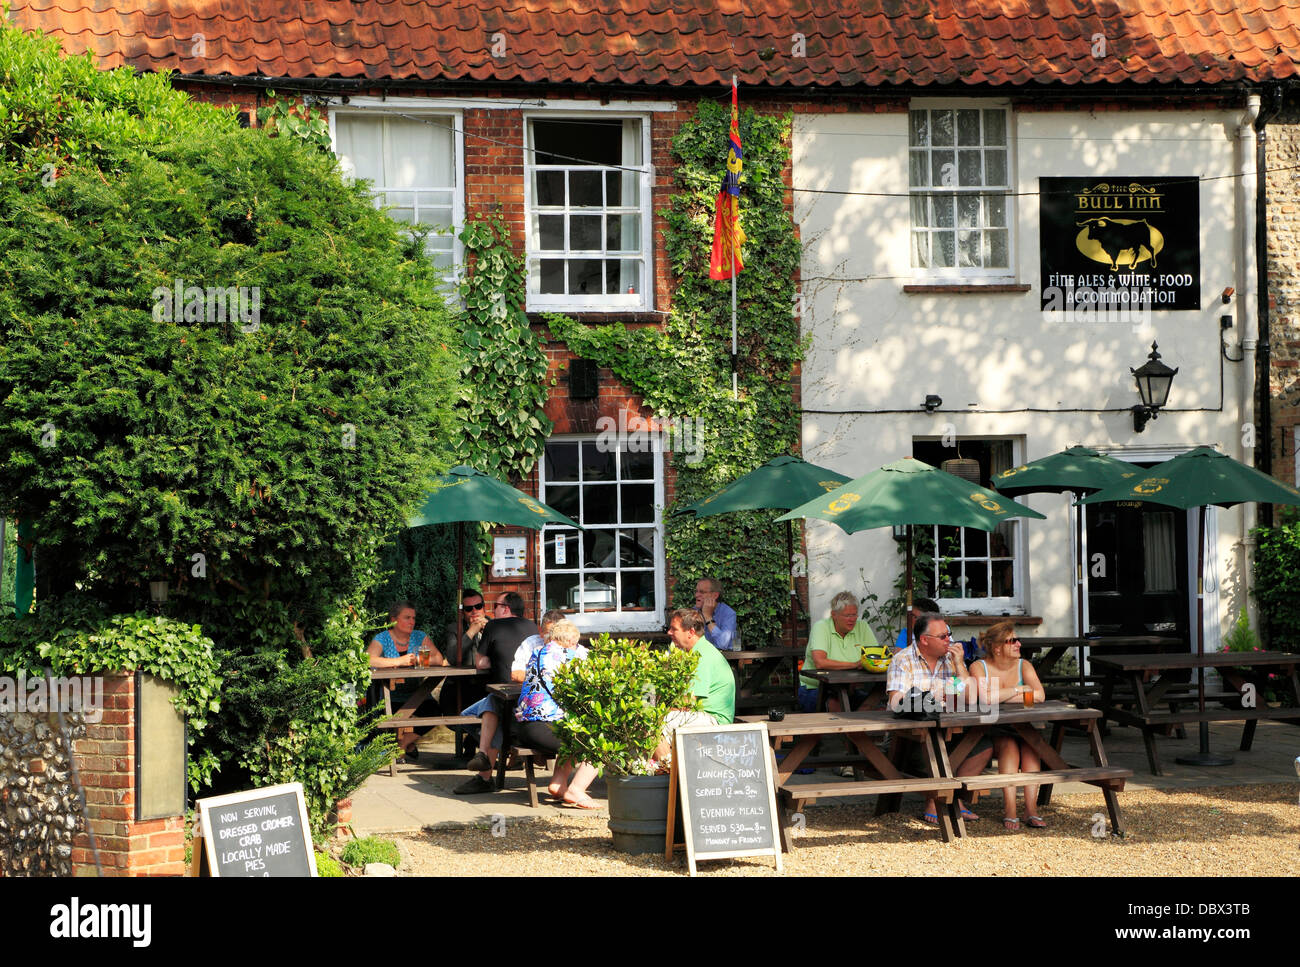 Walsingham, The Bull Inn, garden and pub, people eating drinking, Norfolk, England UK, English pubs inns Stock Photo